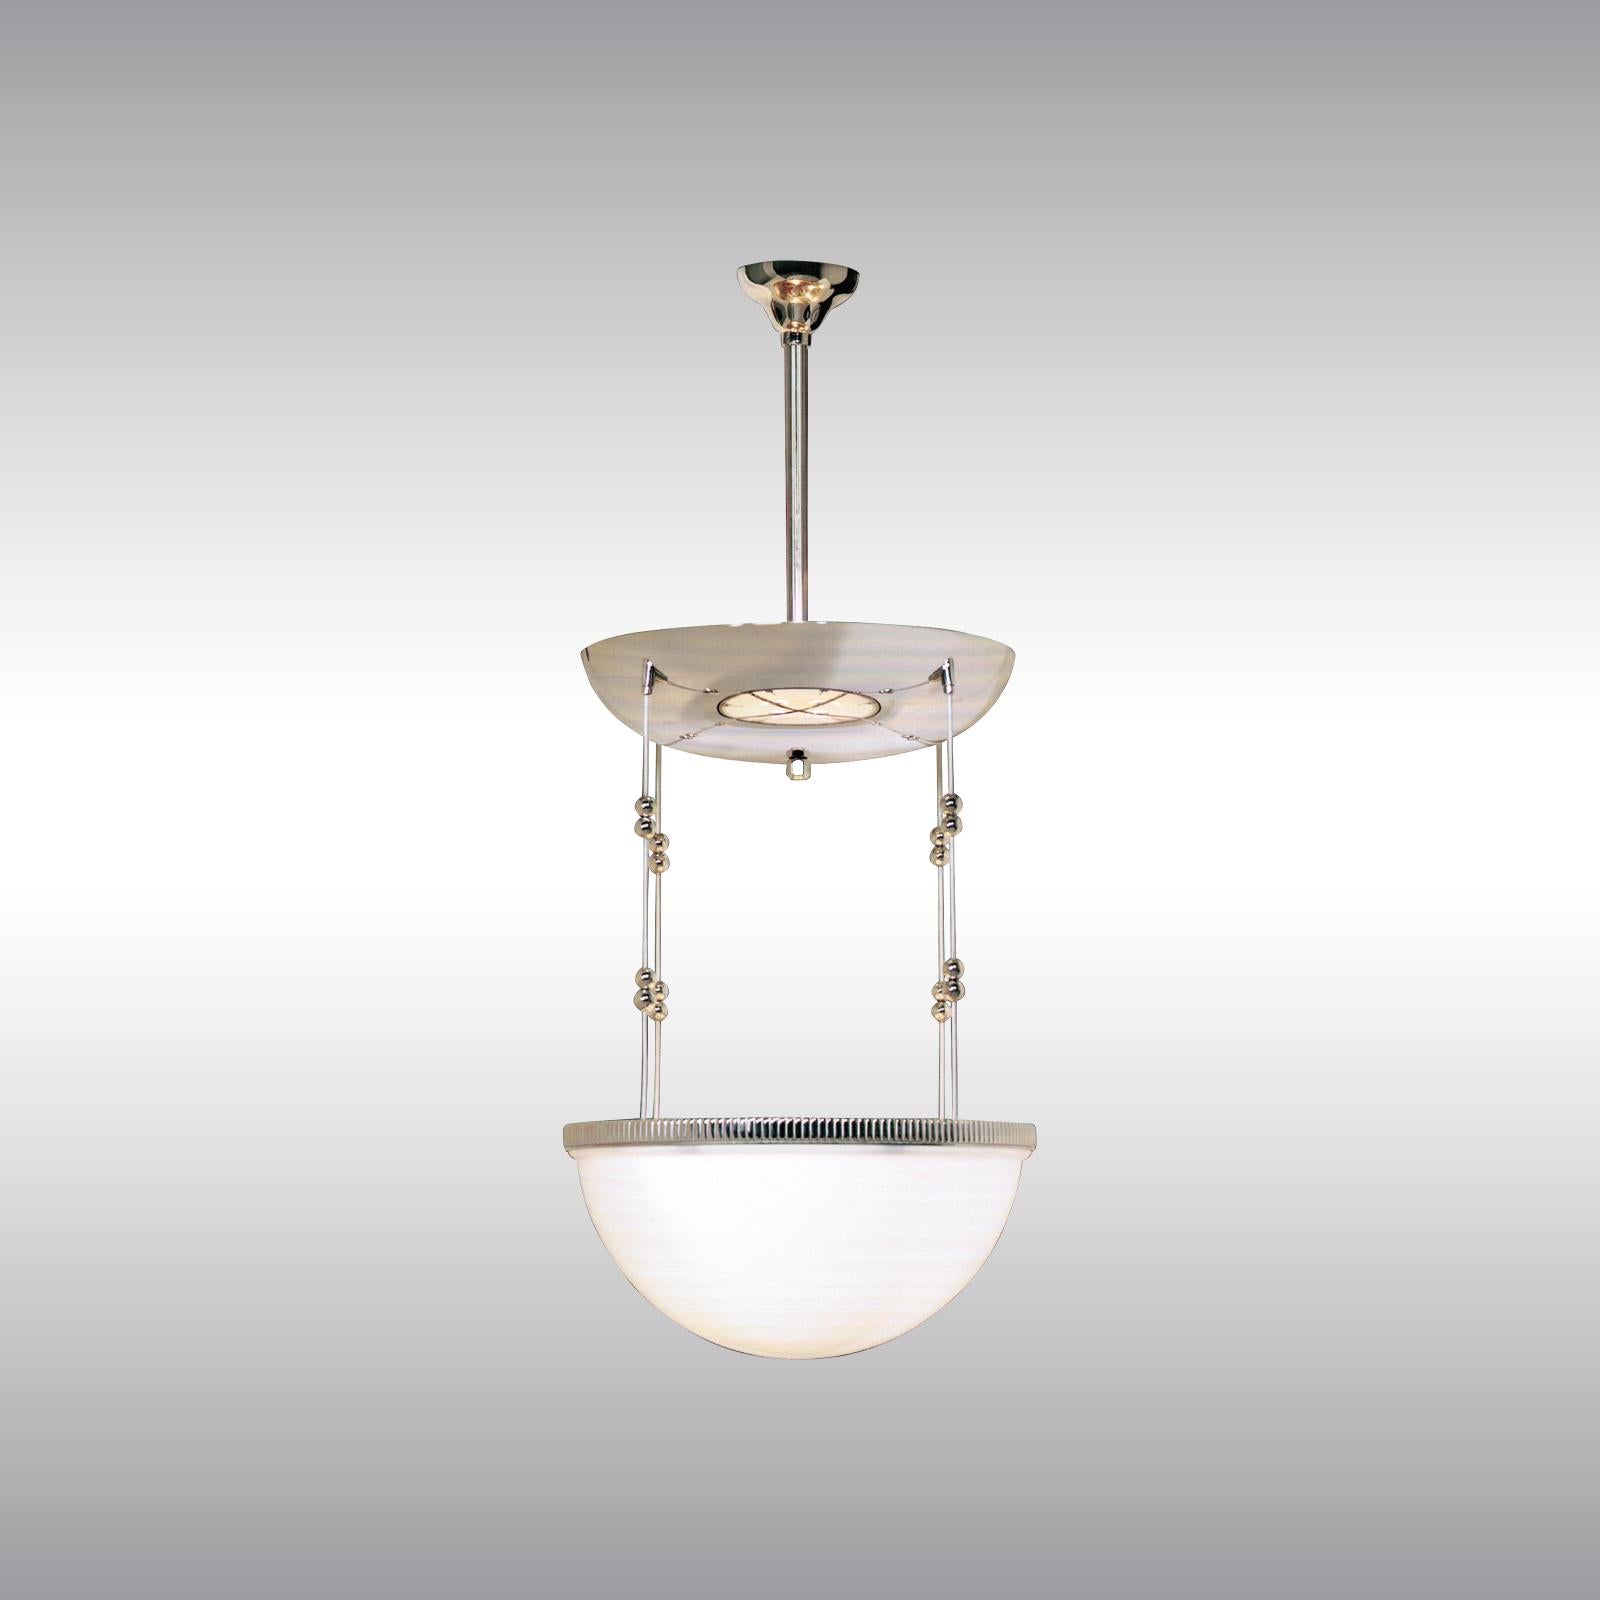 A chandelier which can illluminate a ceiling rosette from the bulbs inside the metal-part which is a mirror and reflect the light from the bulbs inside the glass-bowl. A smaller version with 35cm diameter (13.8